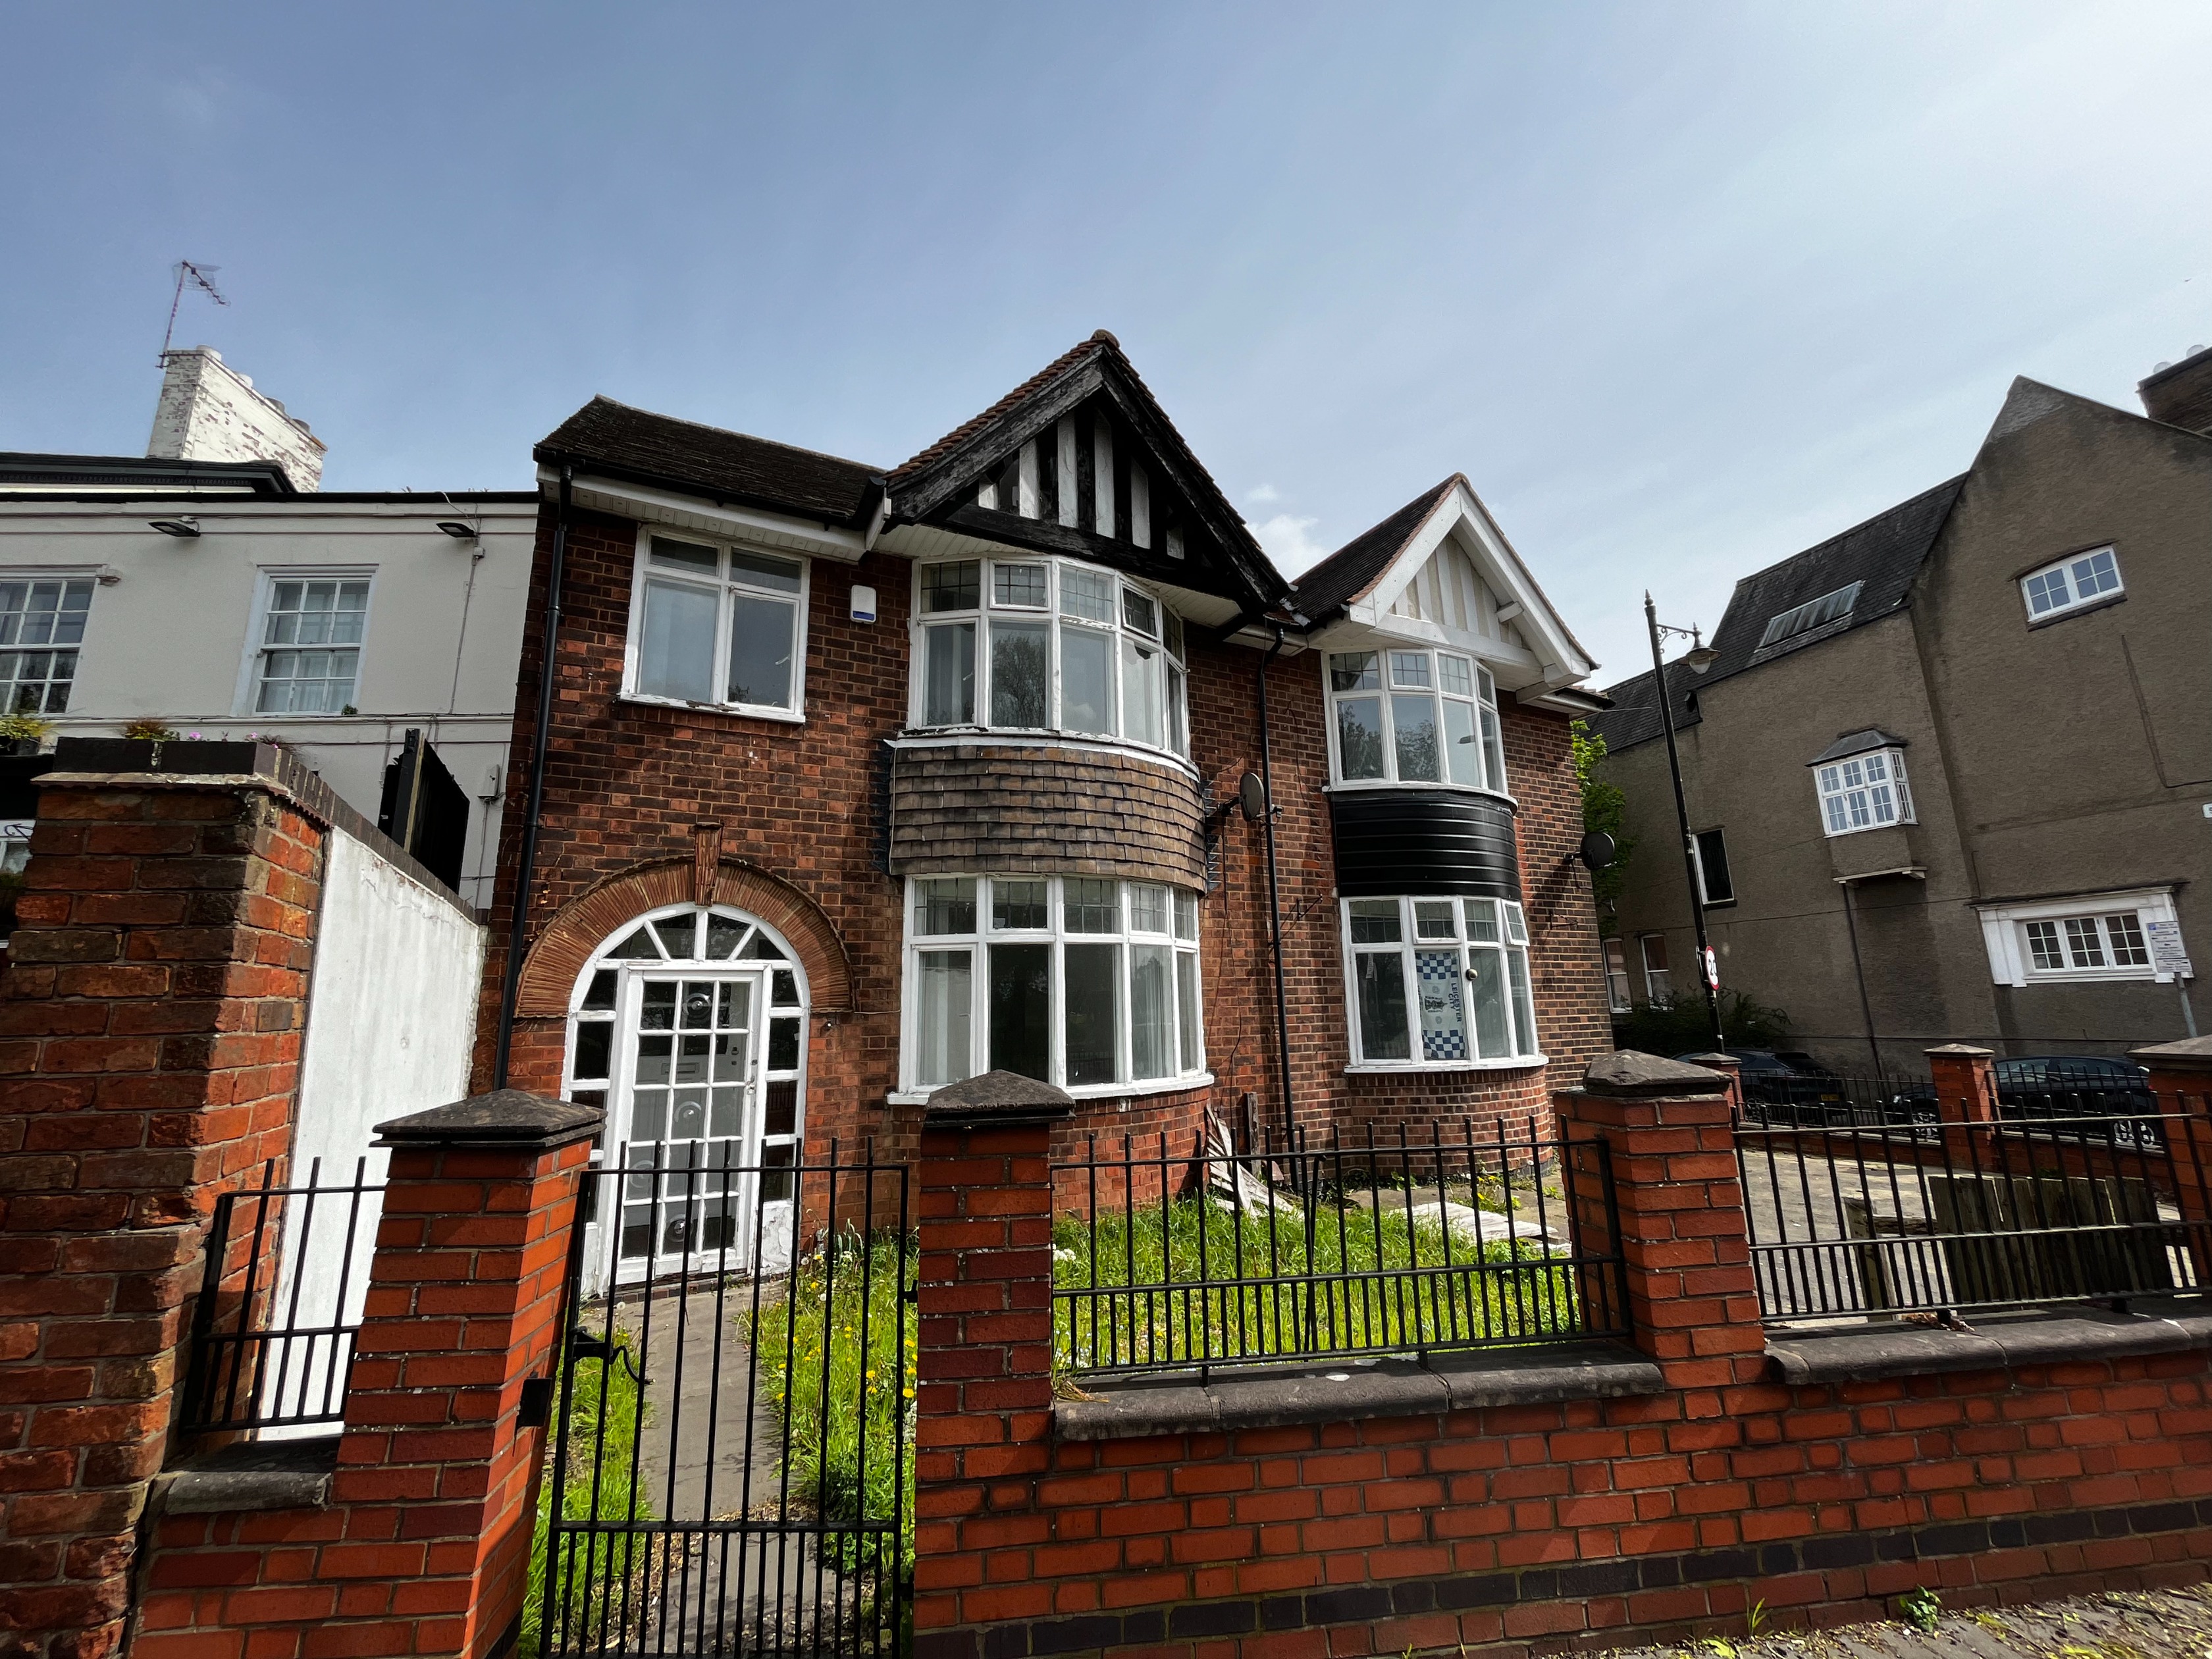 5 bed Semi-detached House for rent in Leicester. From Belvoir - Leicester